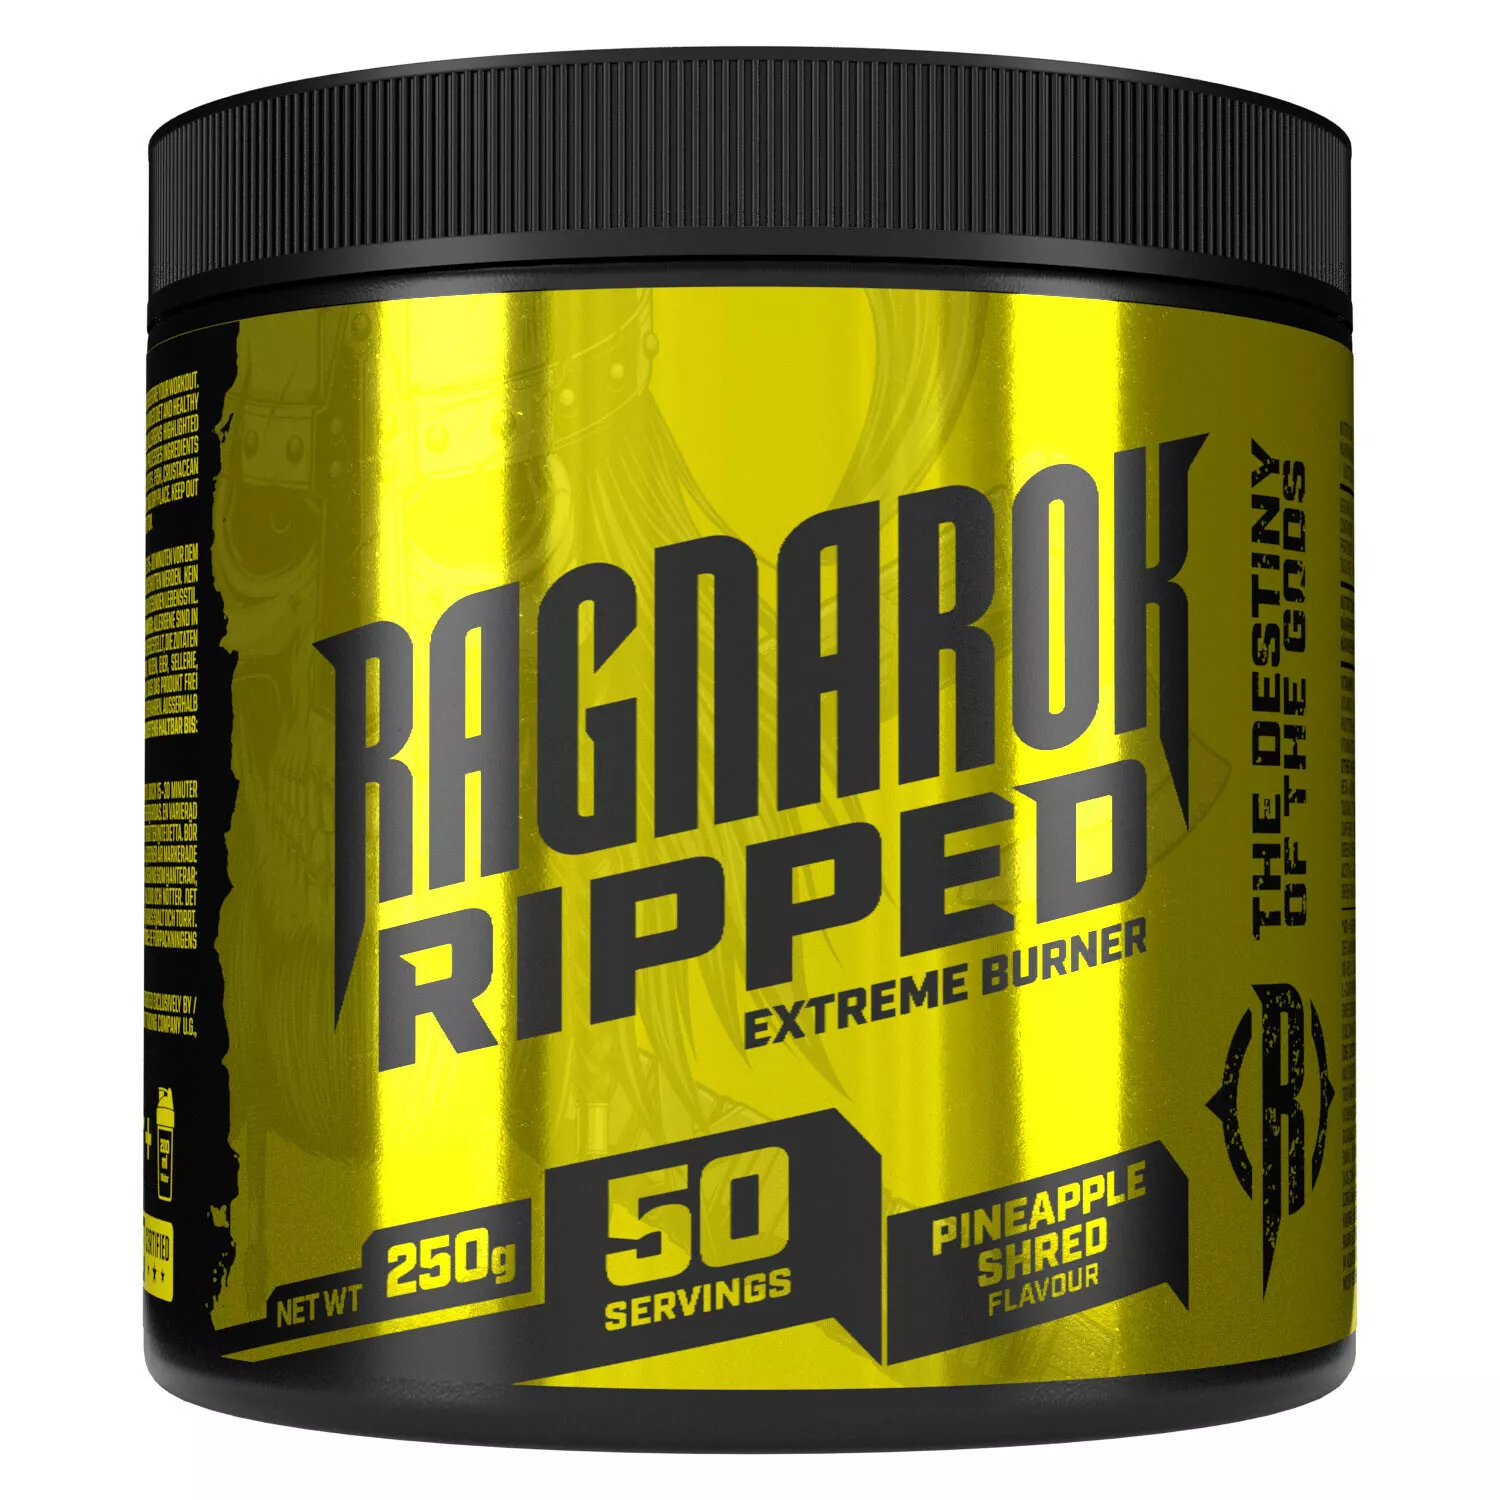 Ripped pre-workout (50 portioner)